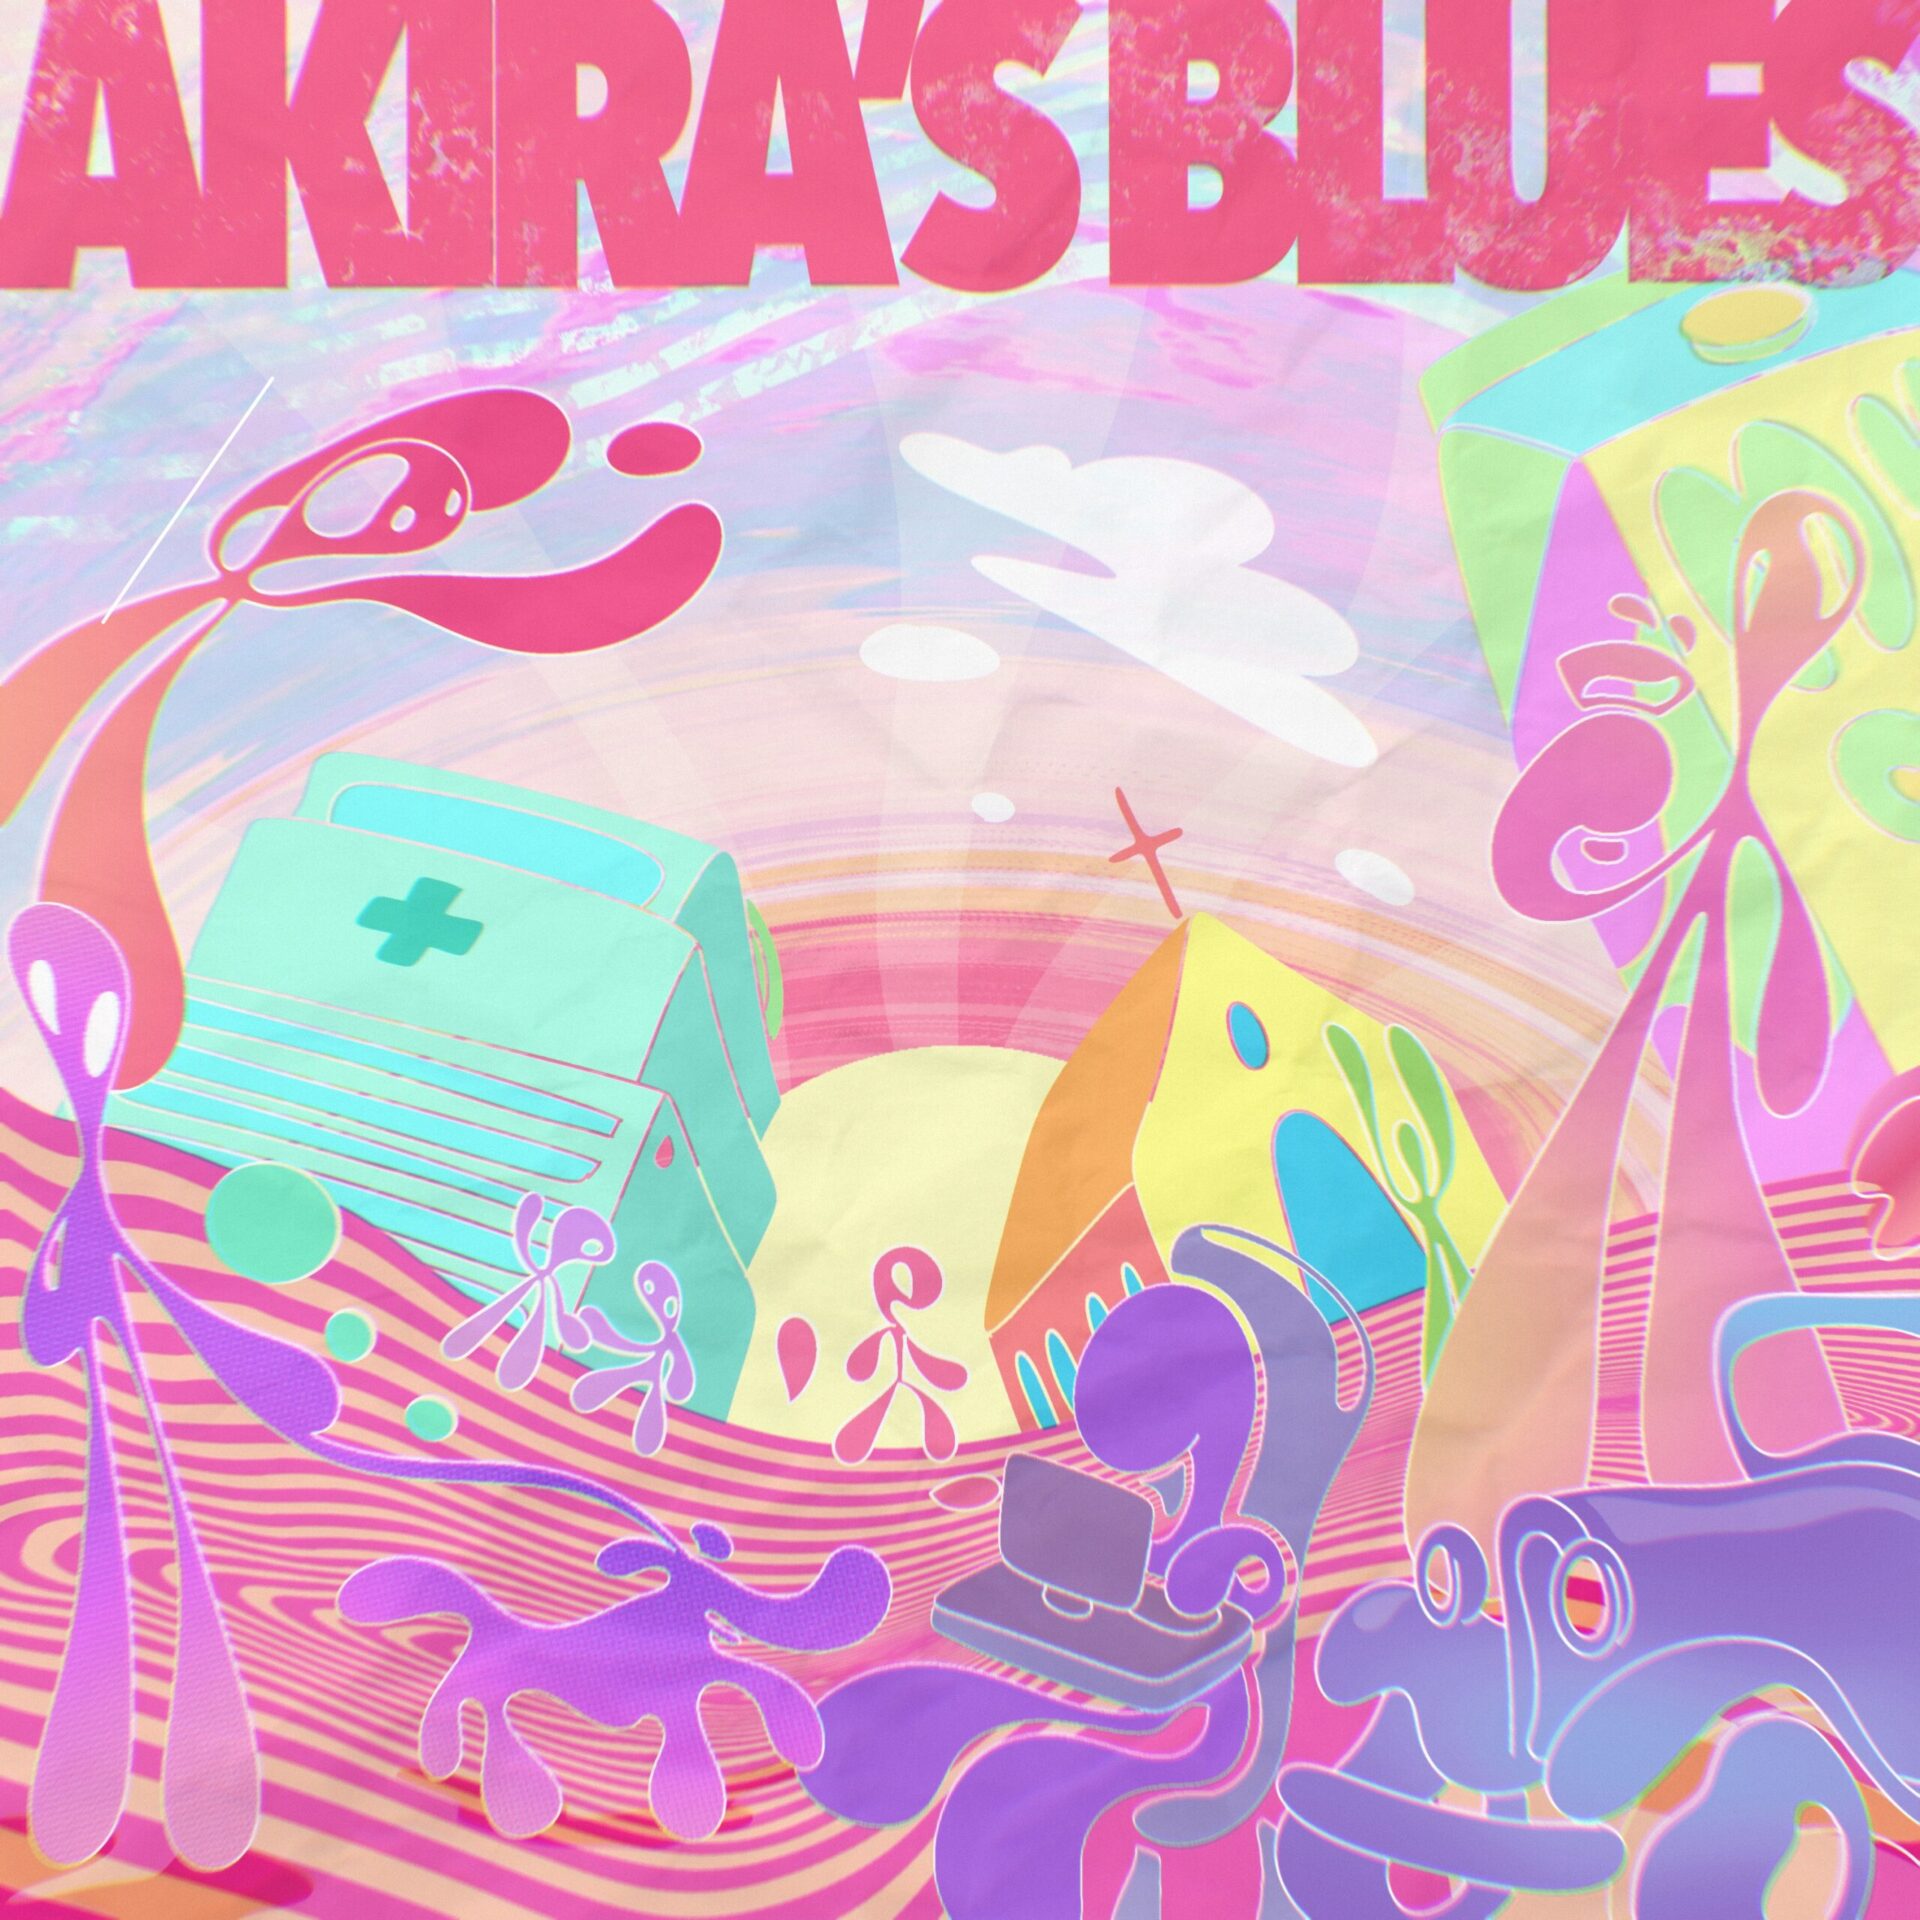 EP cover of Akira's Blues from Trevour Amunga, Ilustración sin título